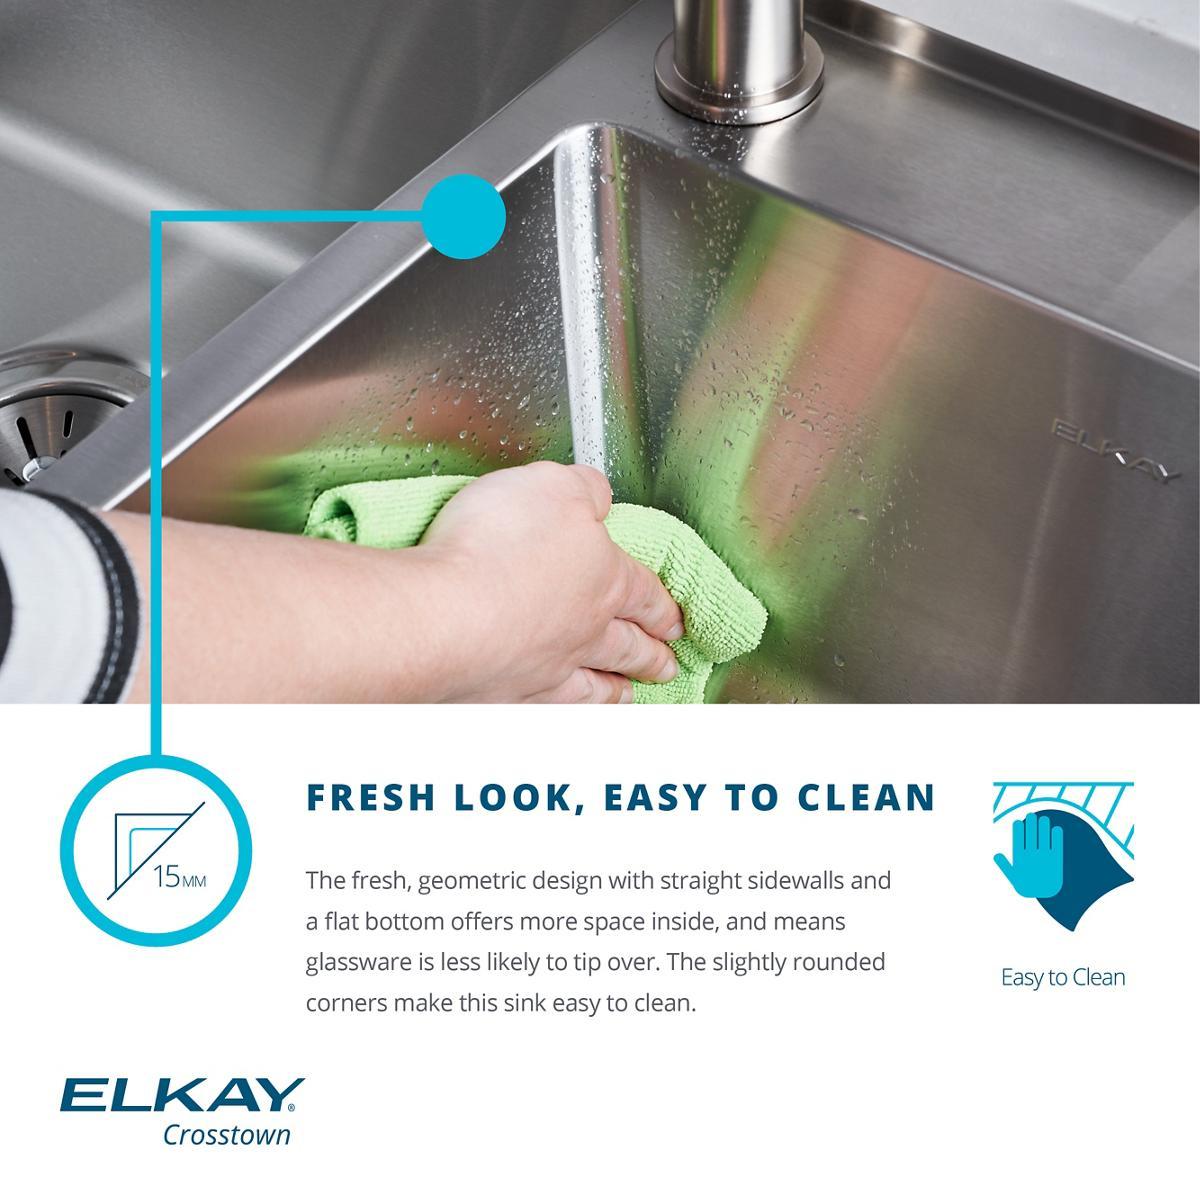 Elkay Crosstown Stainless Steel 32-1/2" x 20-1/2" x 9", Offset Double Bowl Undermount Sink Kit with Water Deck-DirectSinks